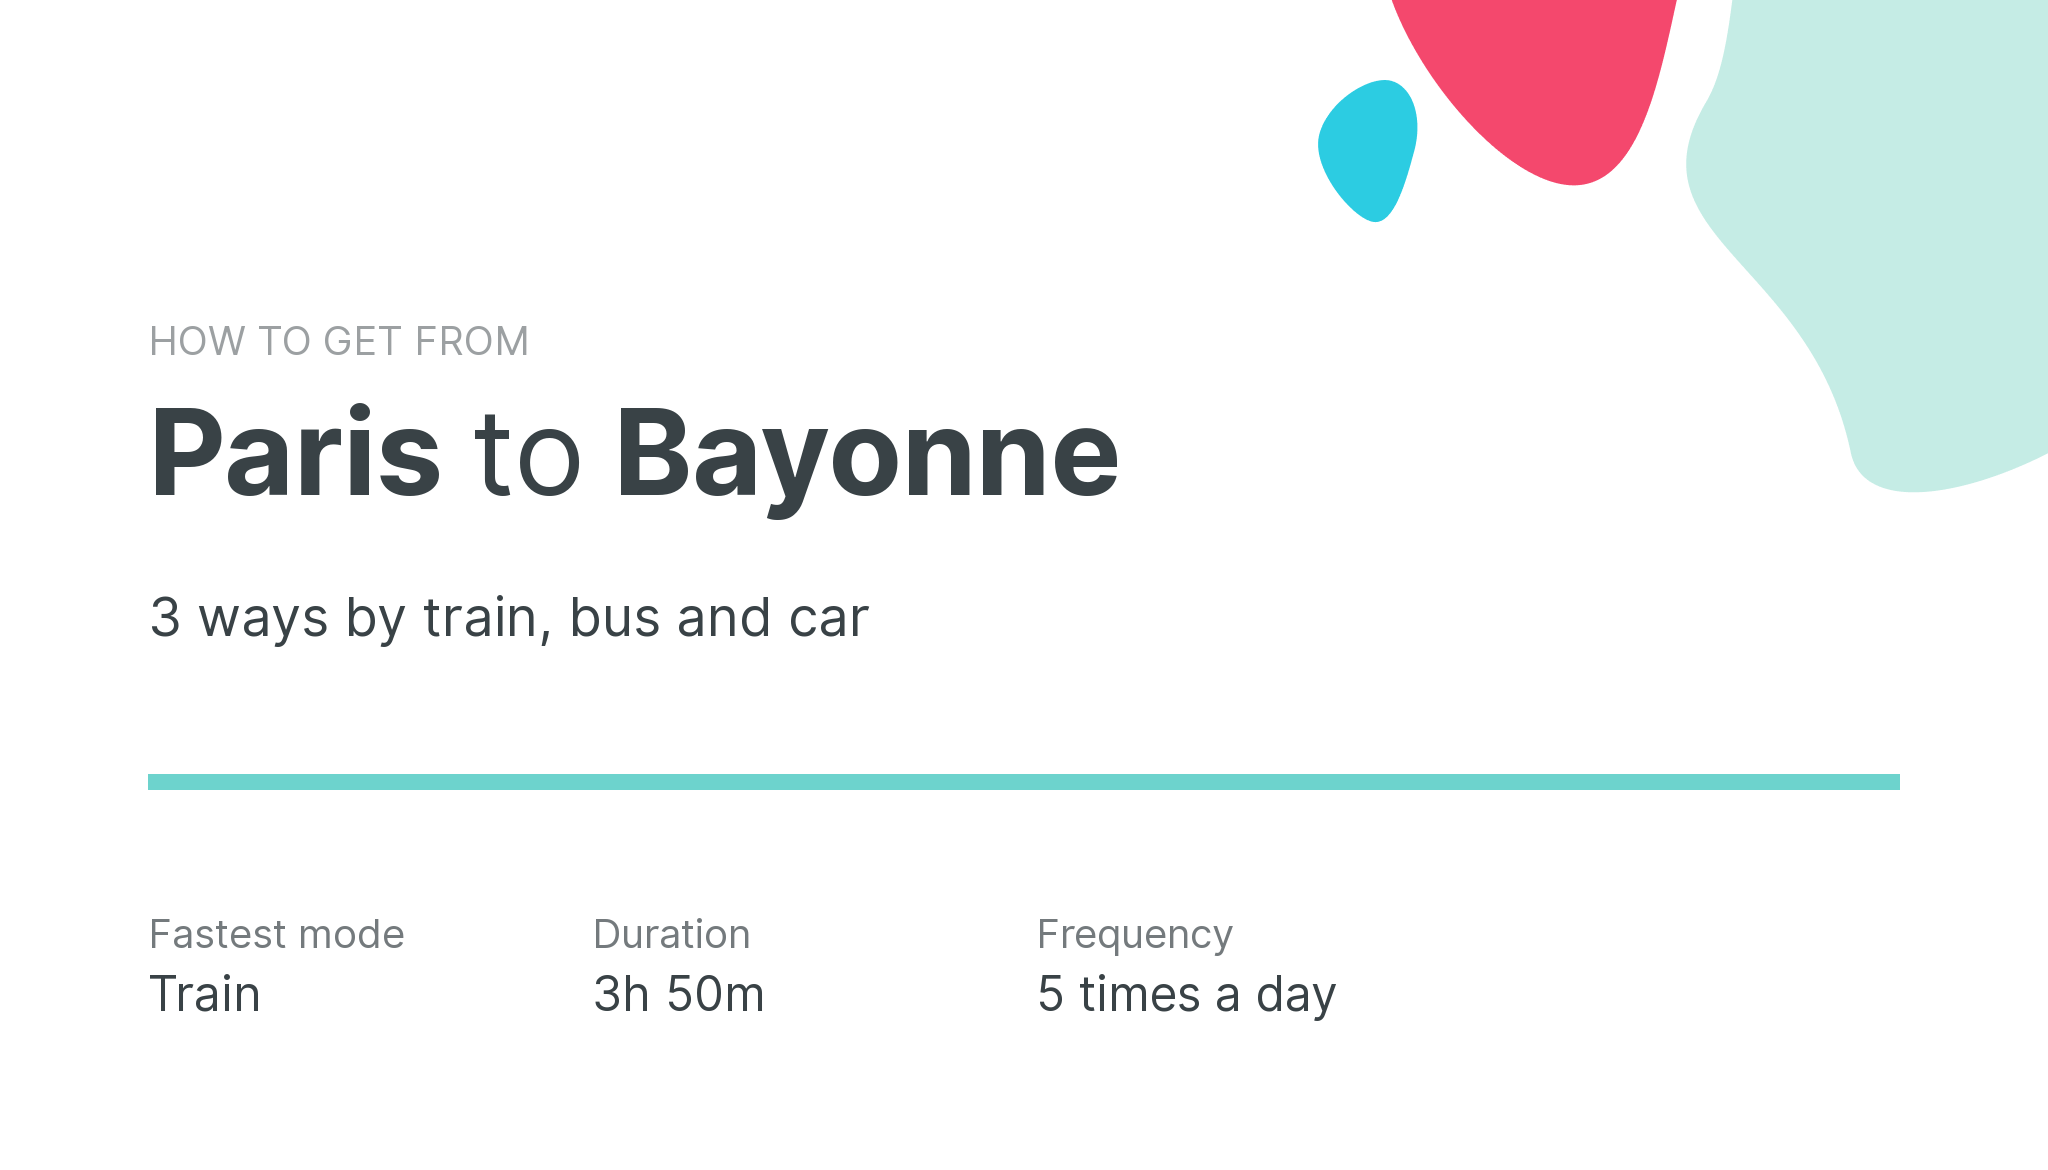 How do I get from Paris to Bayonne